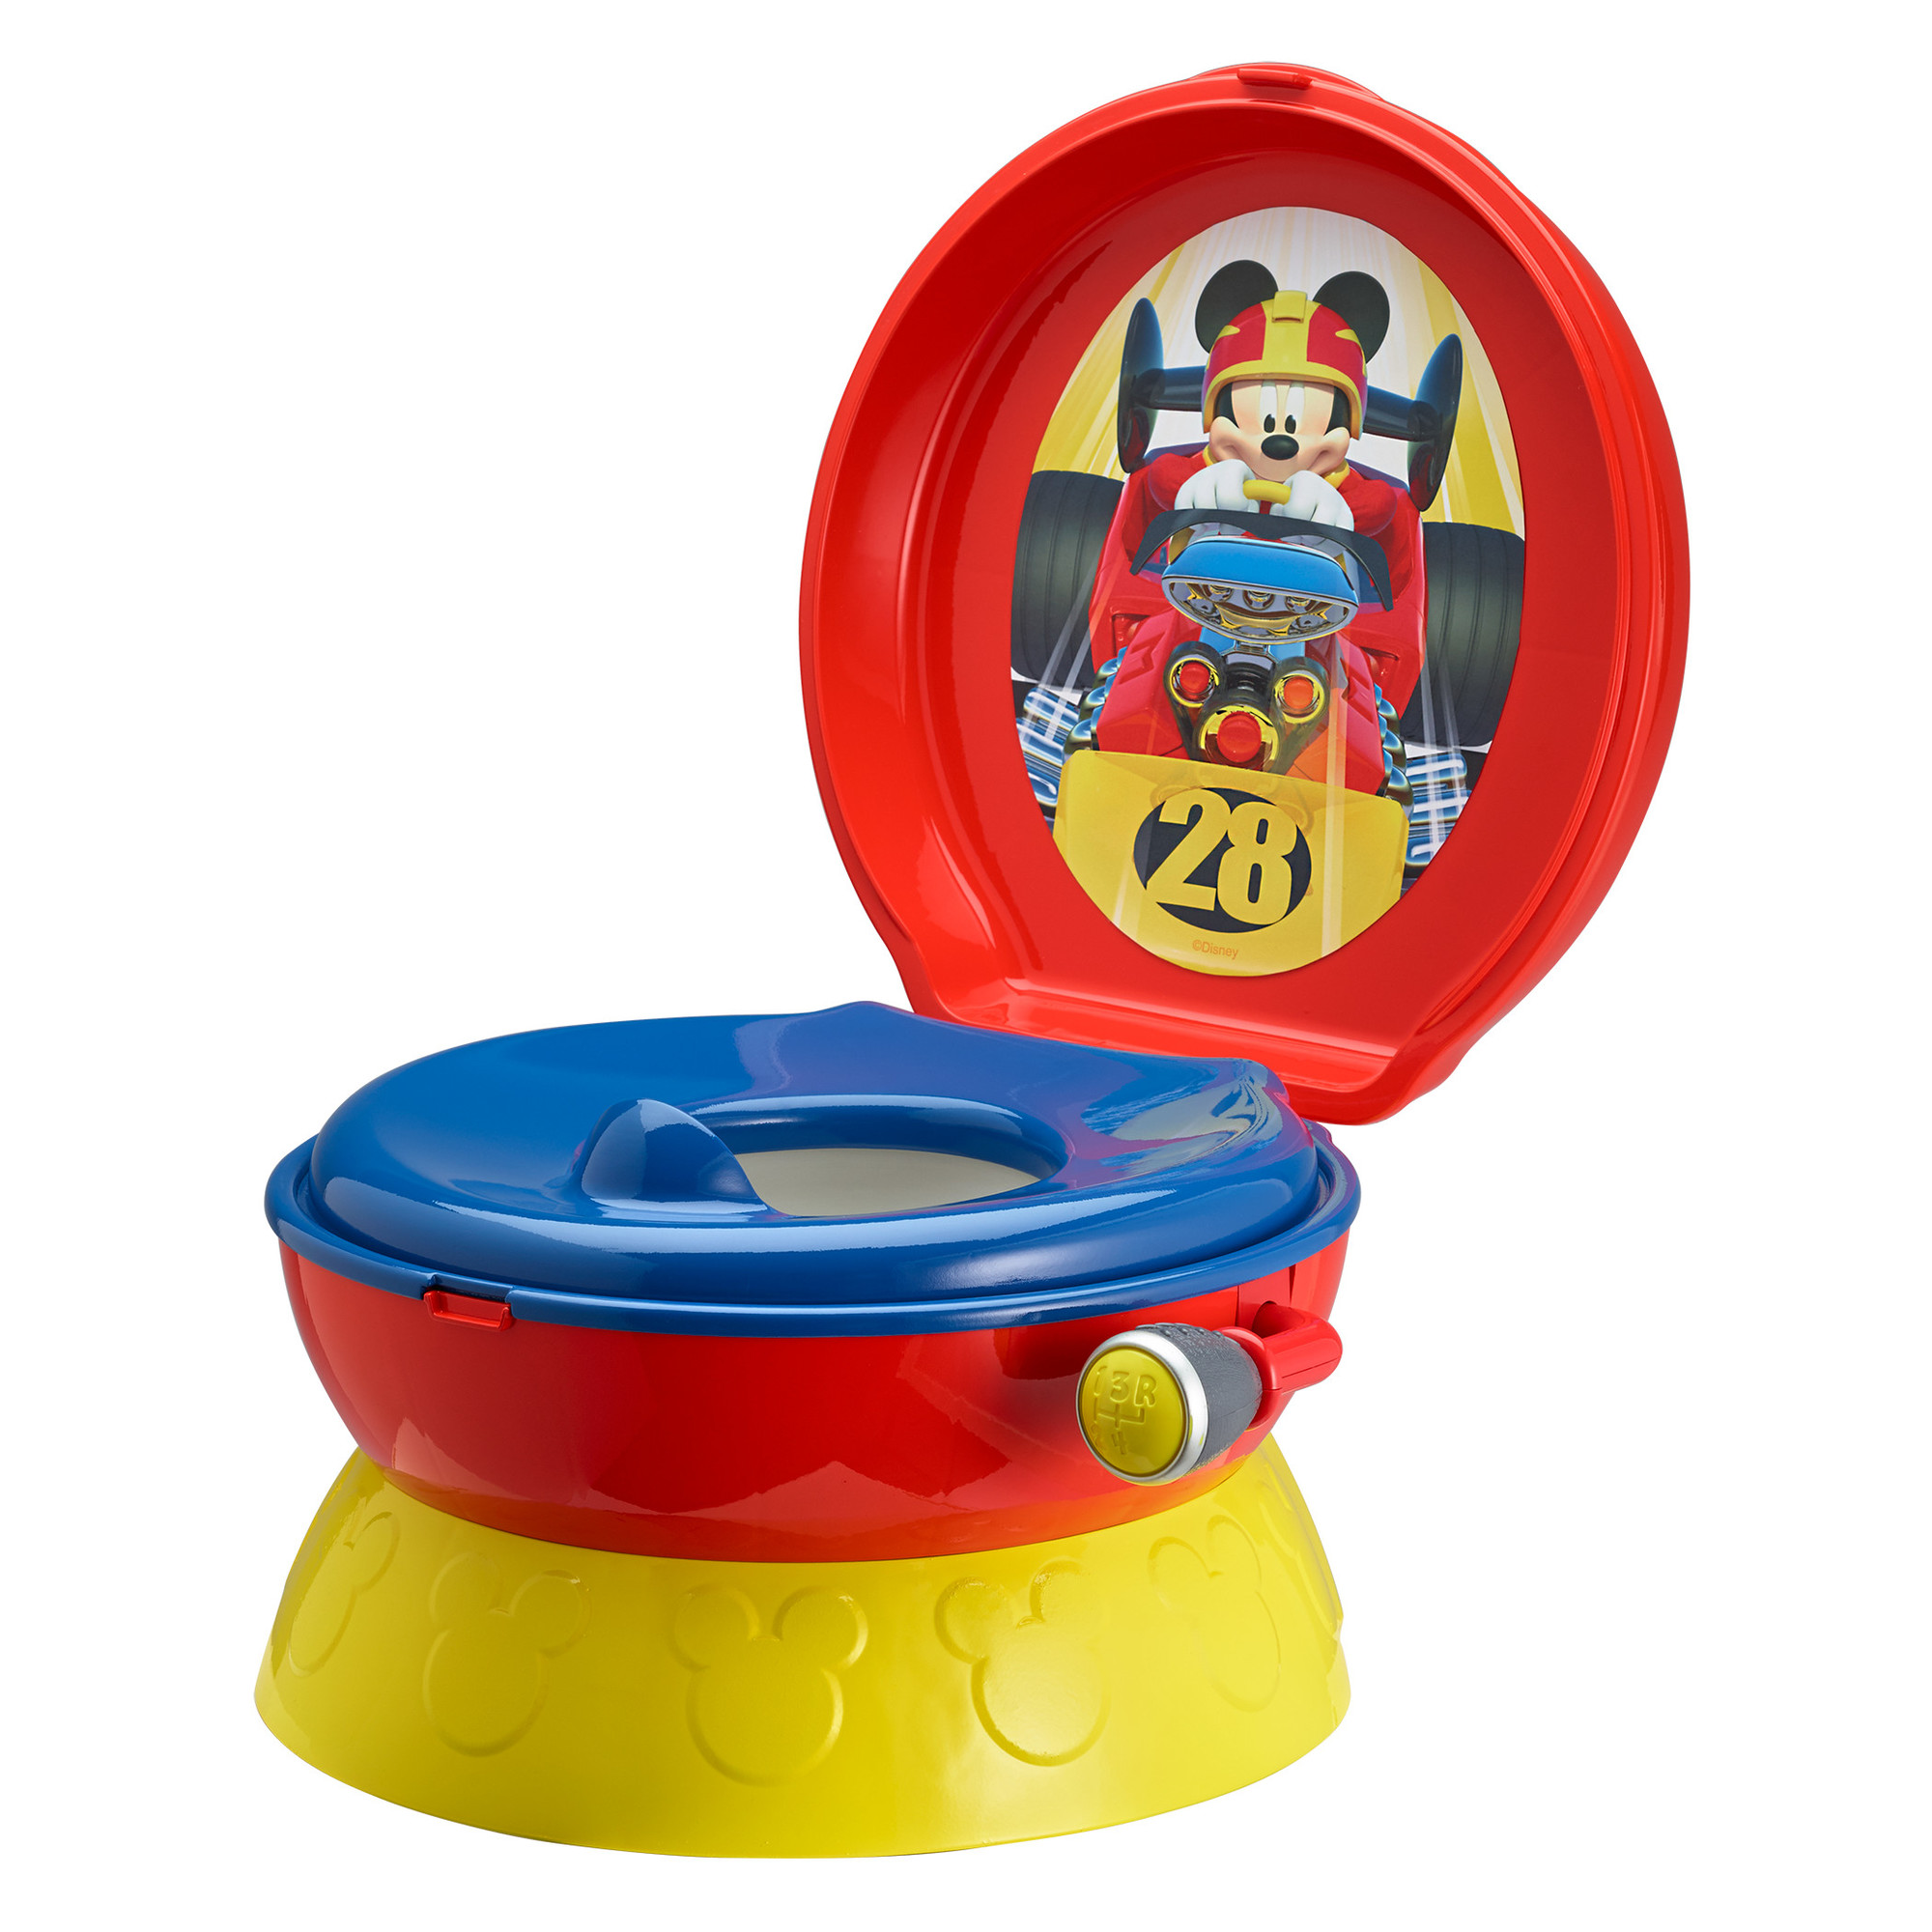 Disney Mickey Mouse Racer 3-in-1 Potty Training Toilet, Toddler Toilet Training Set & Step Stool - image 1 of 5